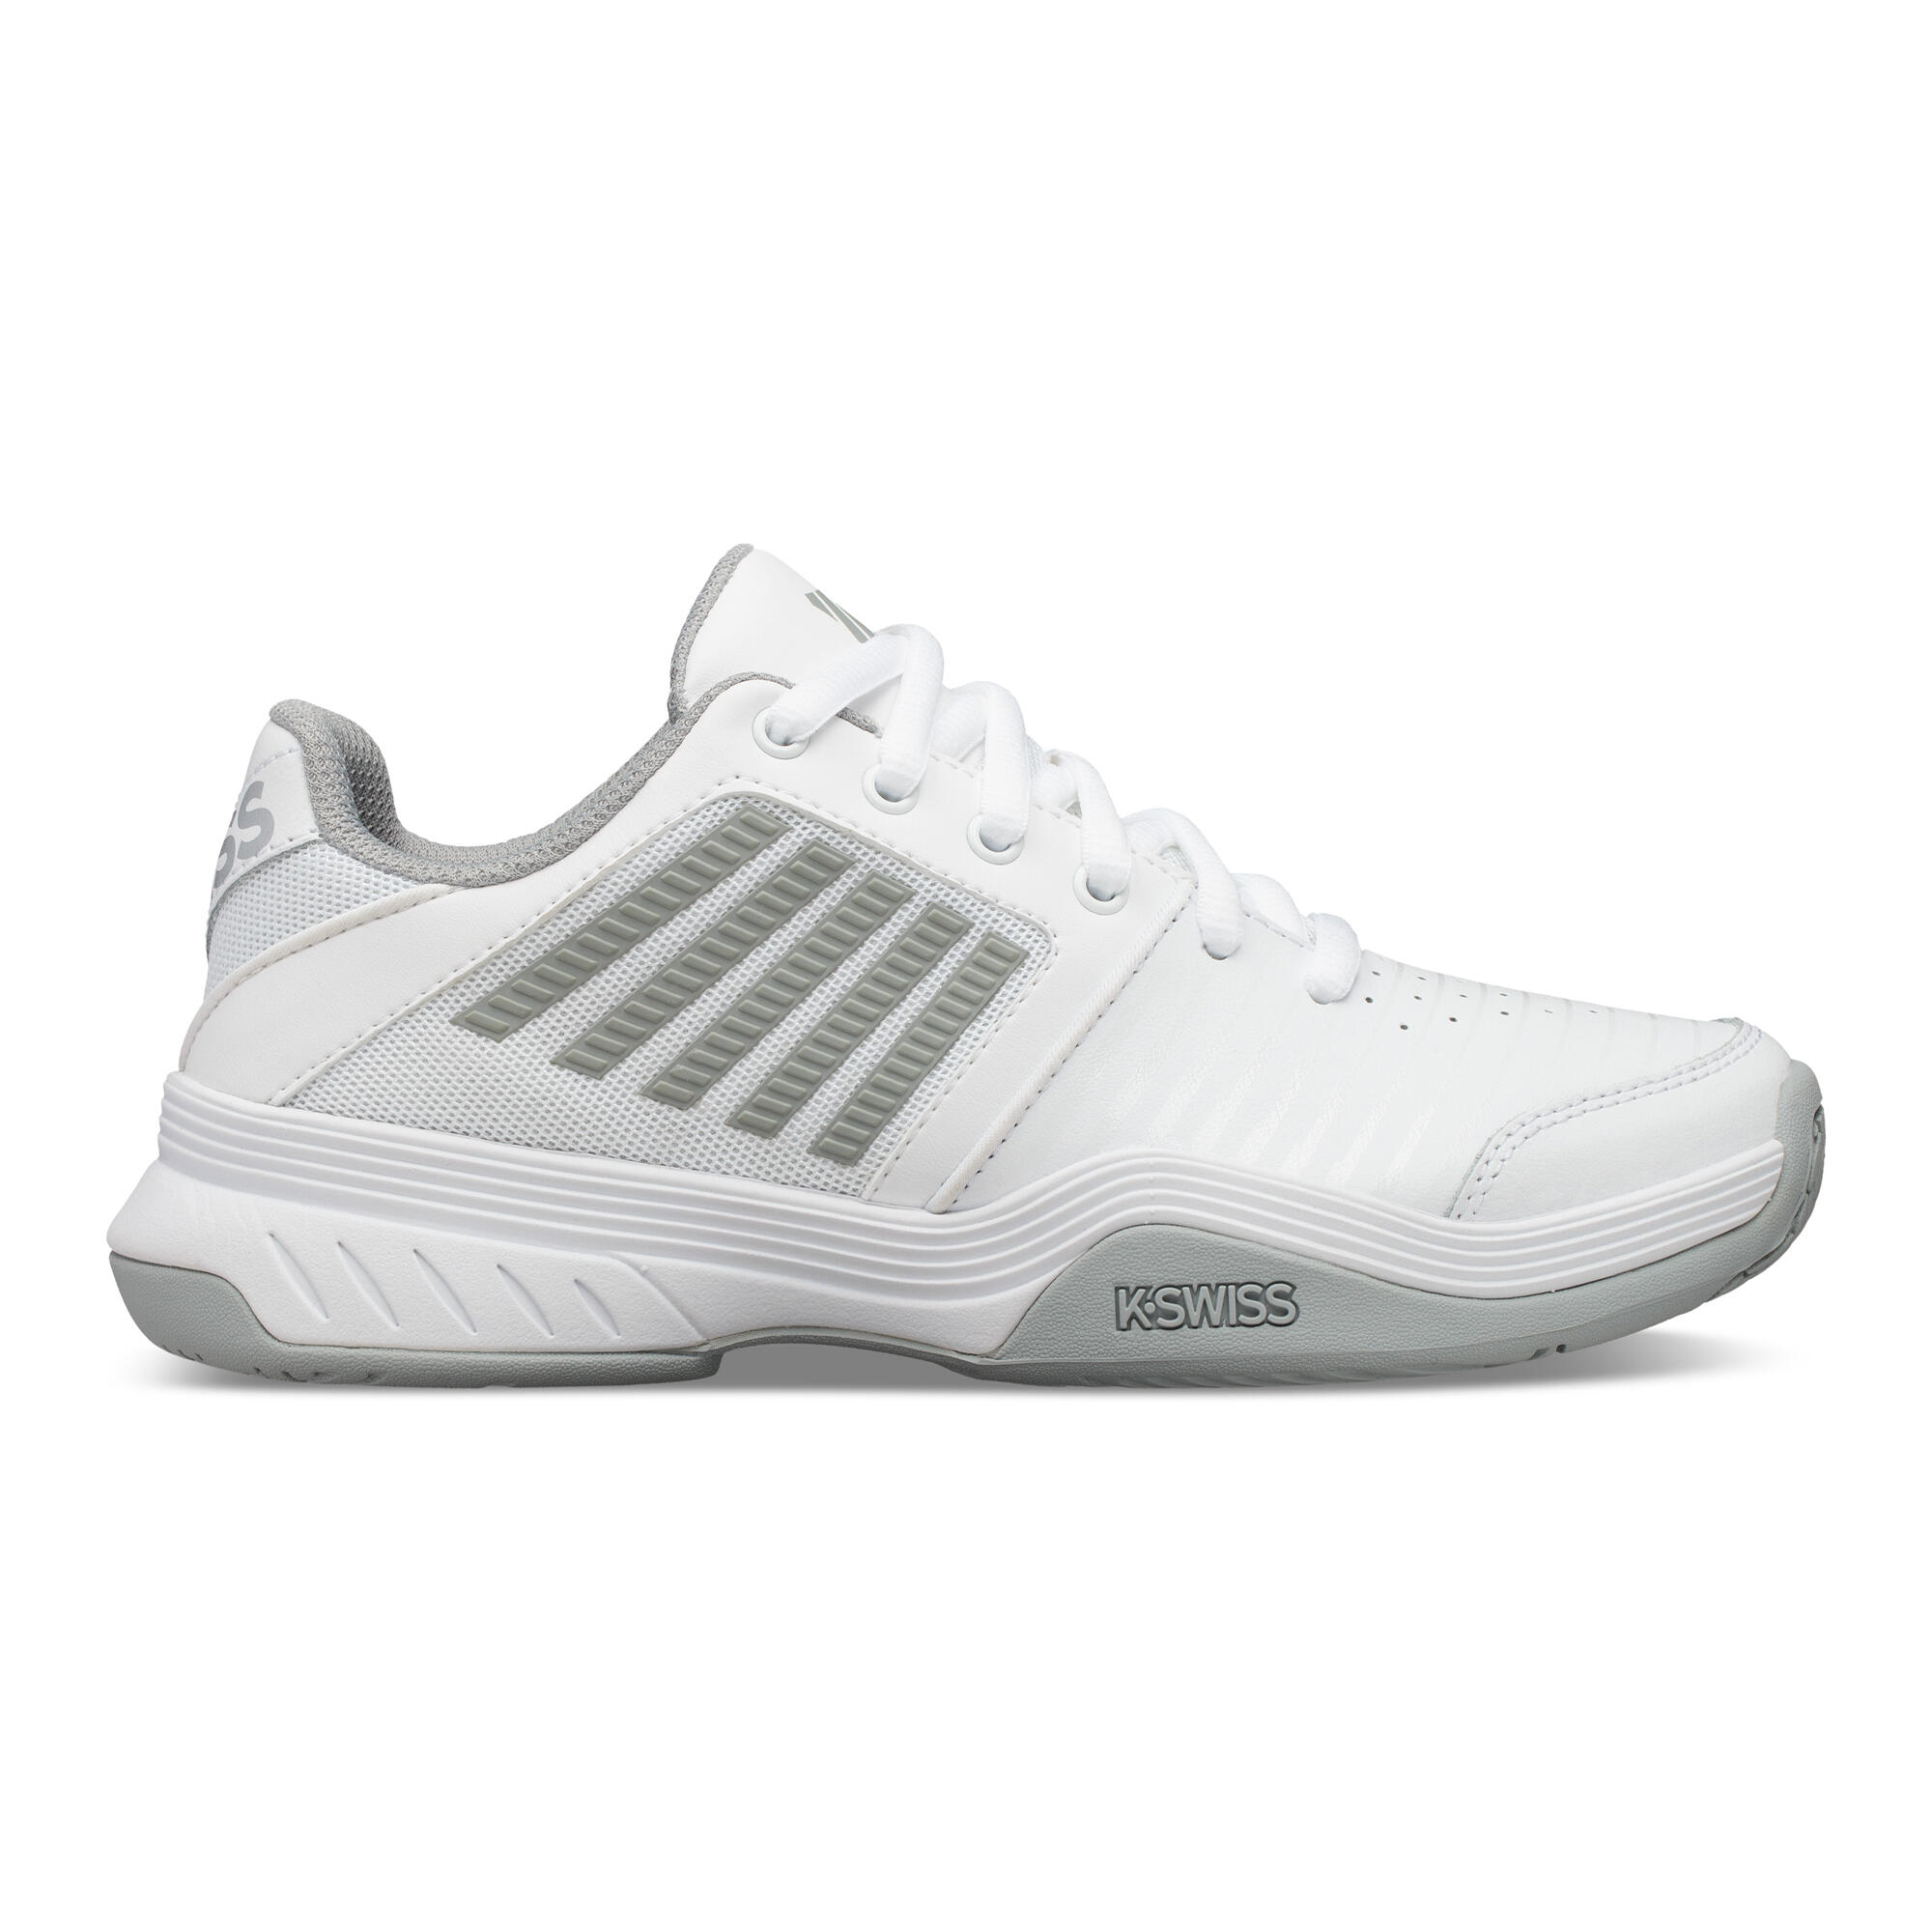 Women's Clay Court Tennis Shoes KSwiss Court Express - White 2/6